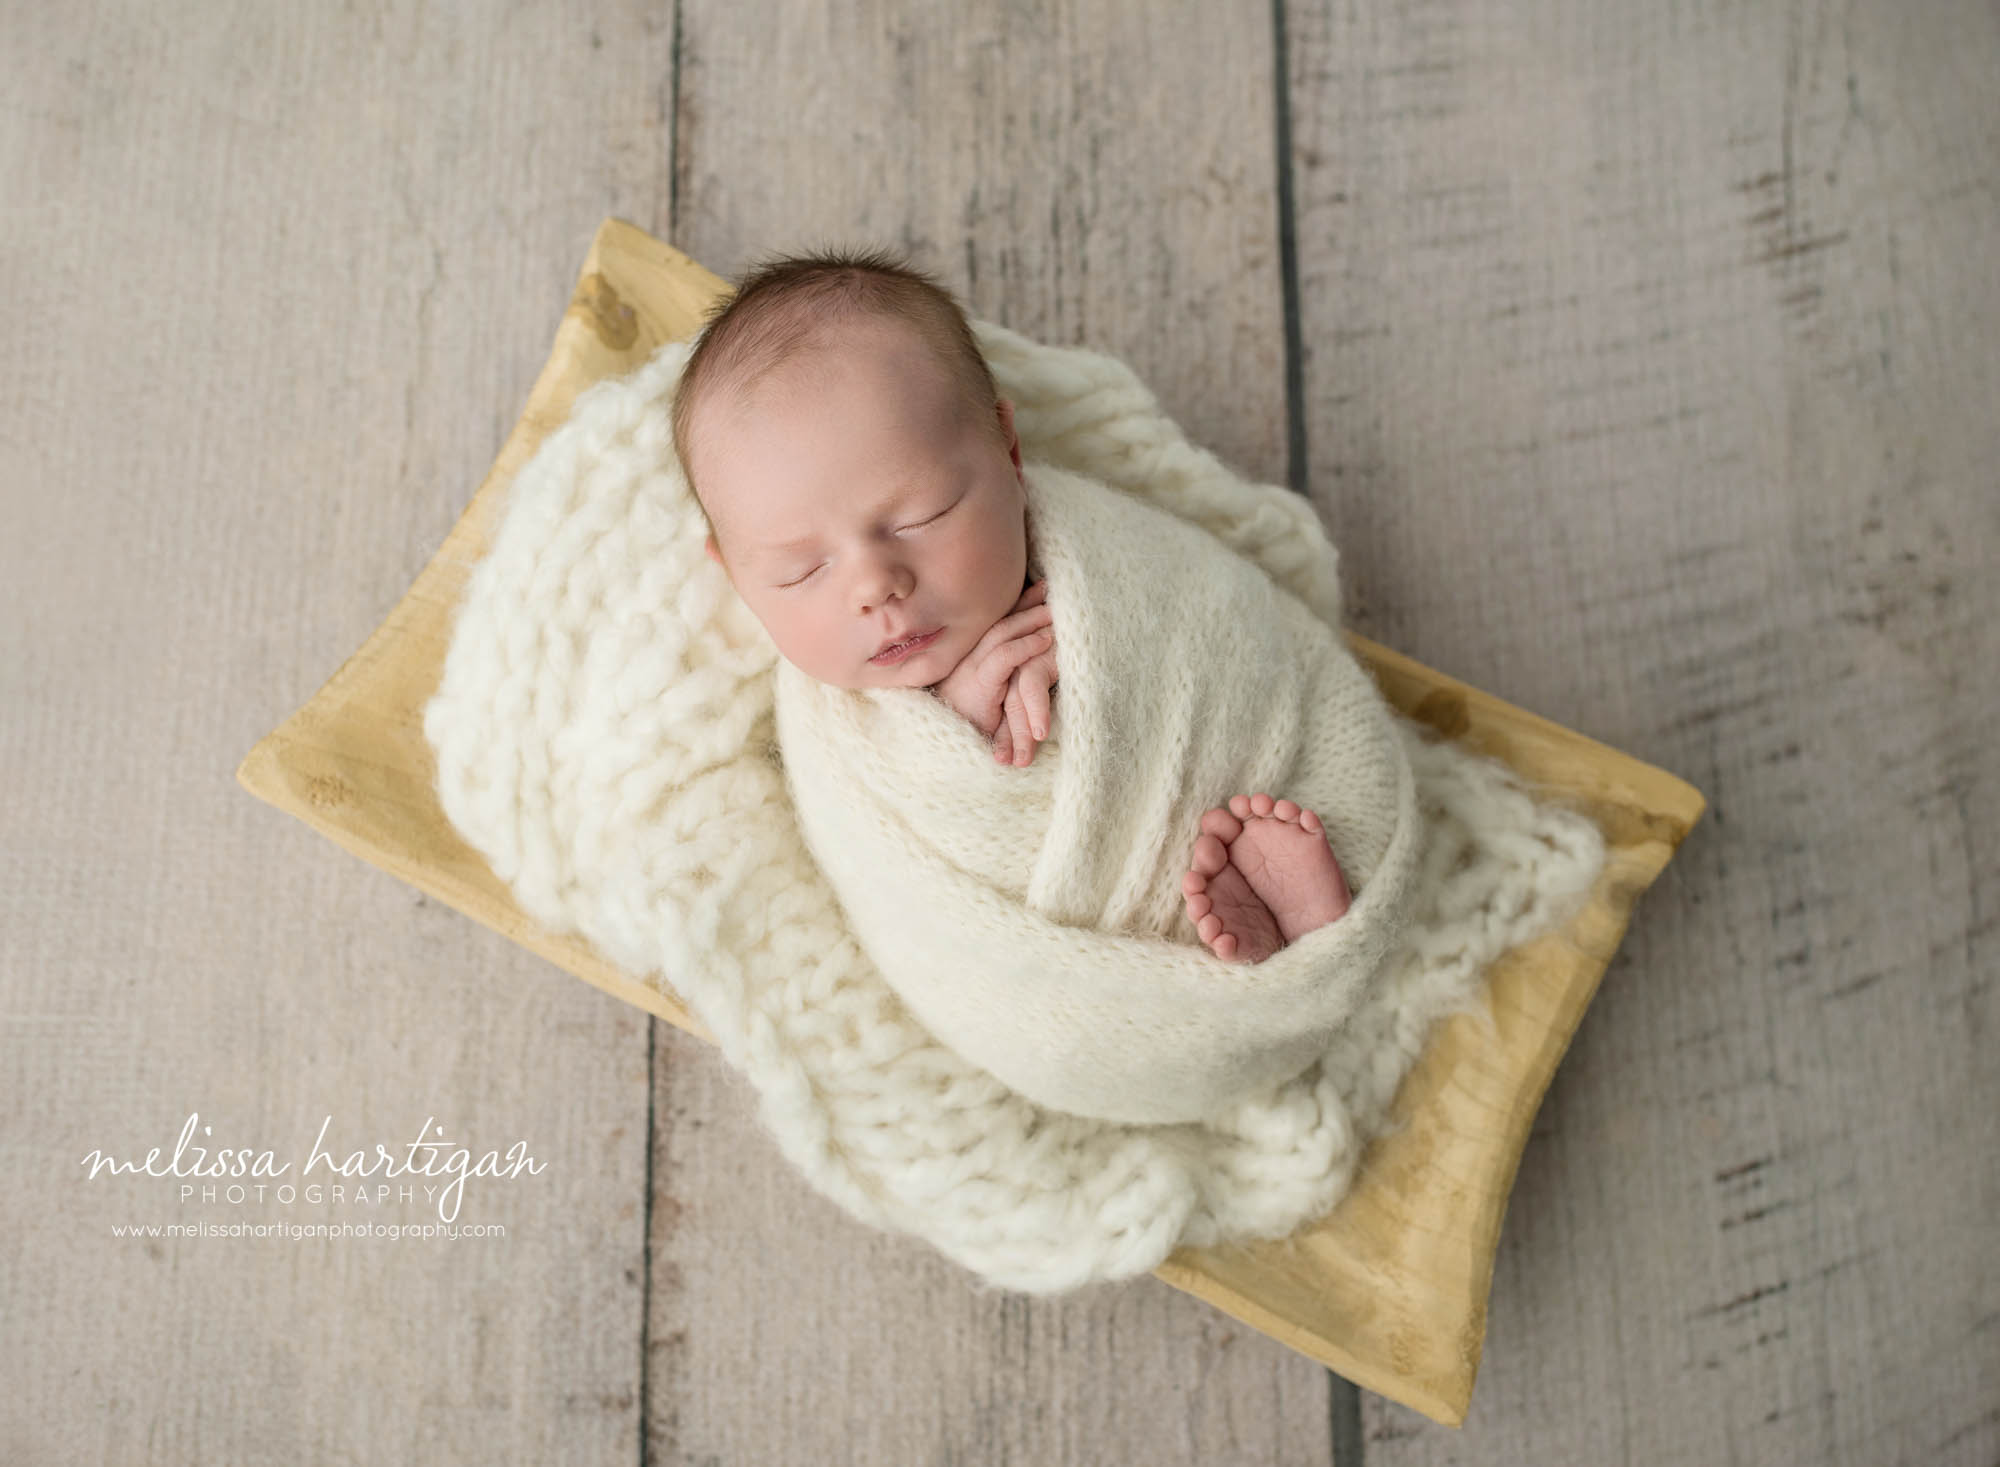 newborn baby boy wrapped in cream wrap posed in wooden bowl